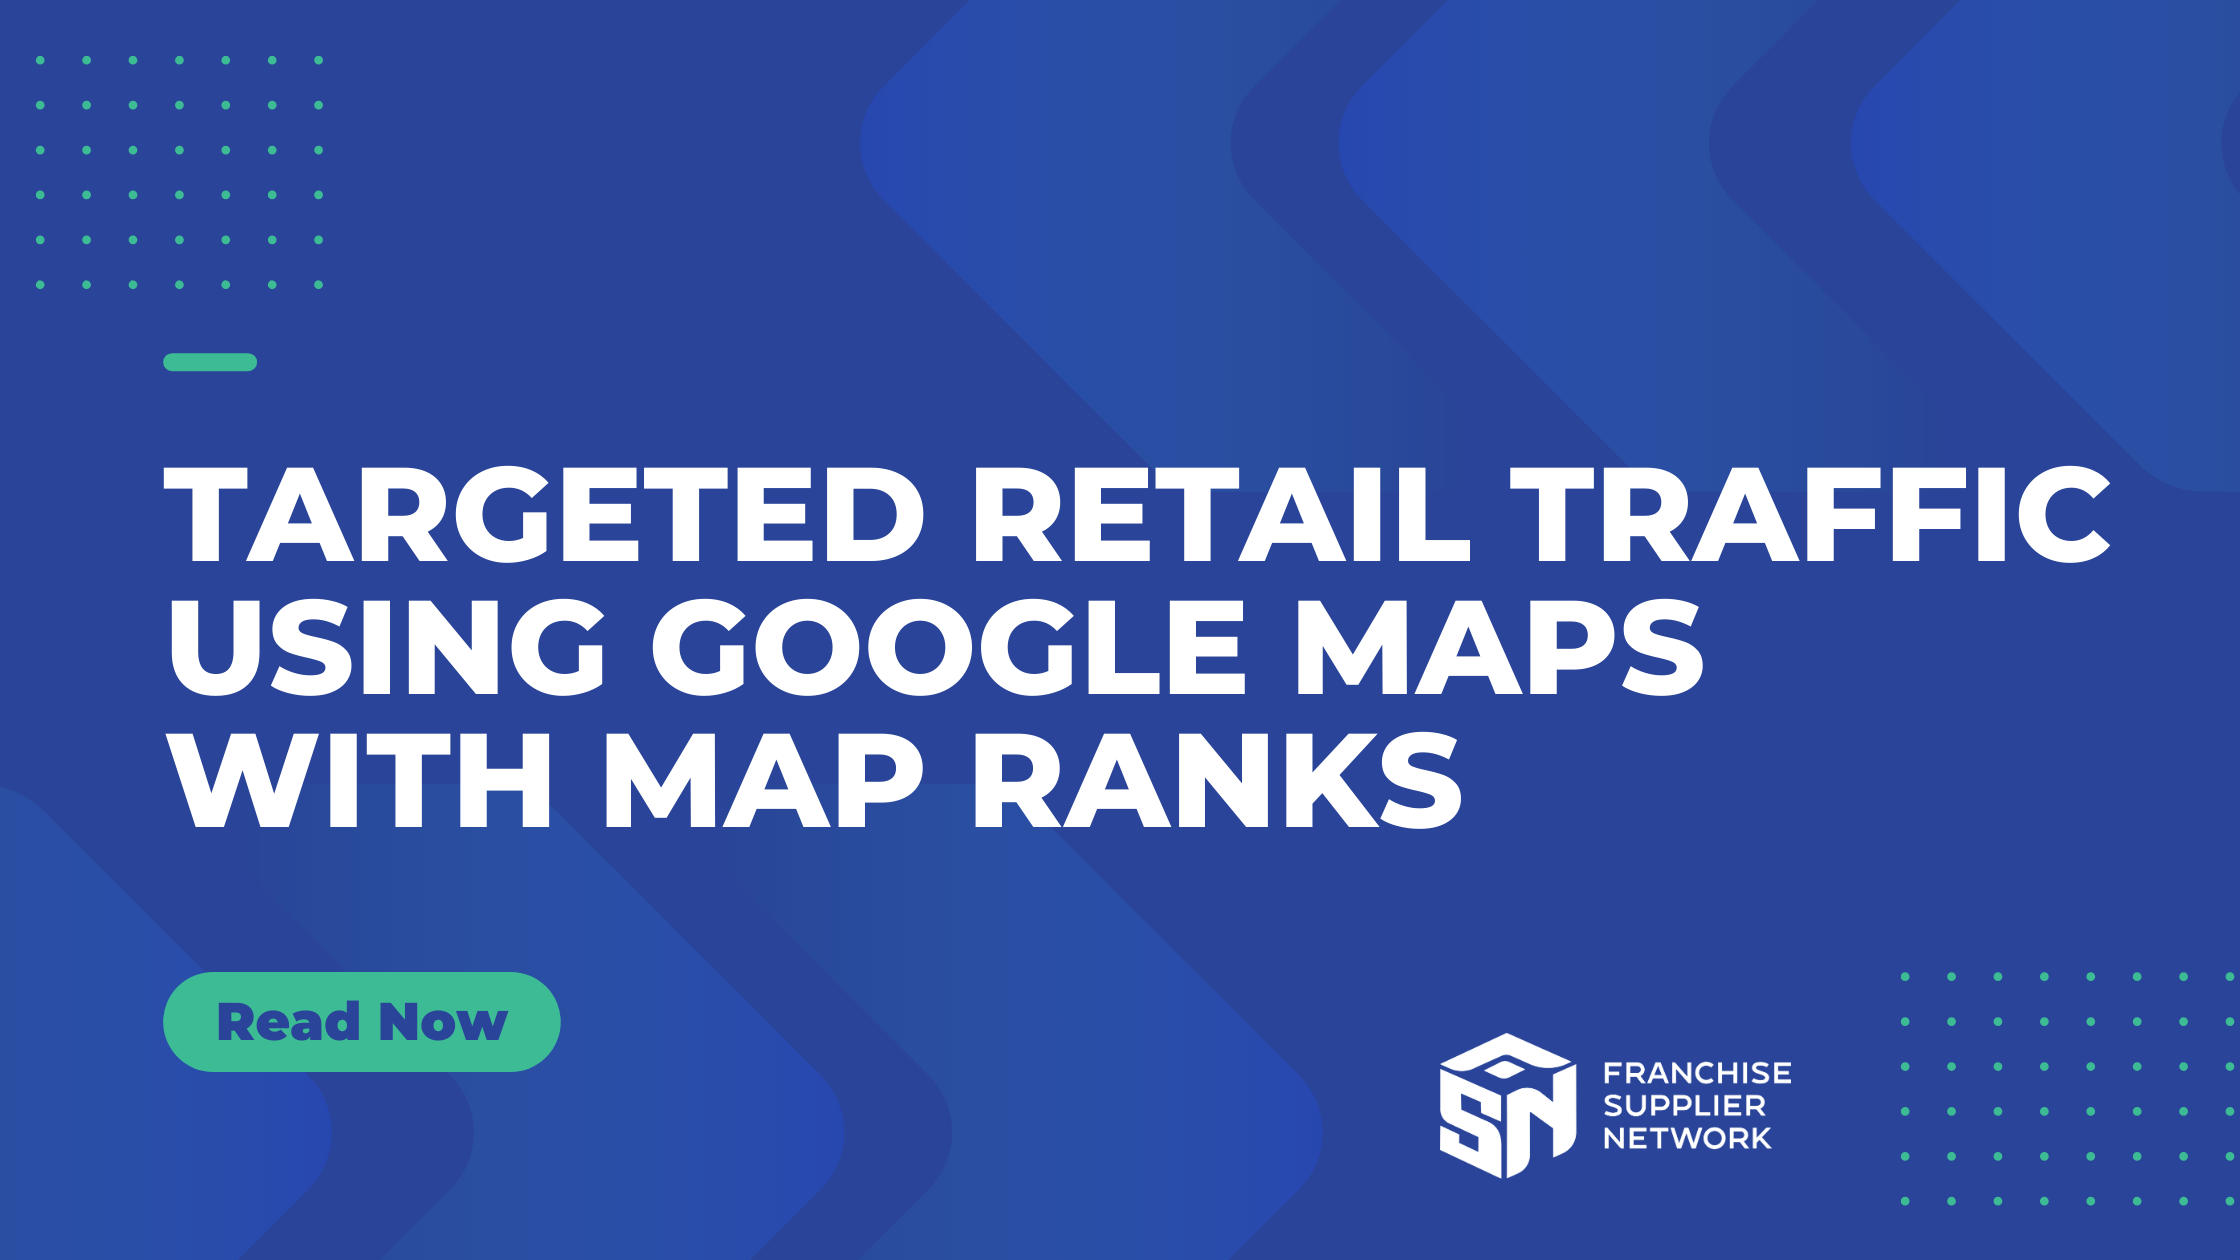 Targeted Retail Traffic Using Google Maps with Map Ranks